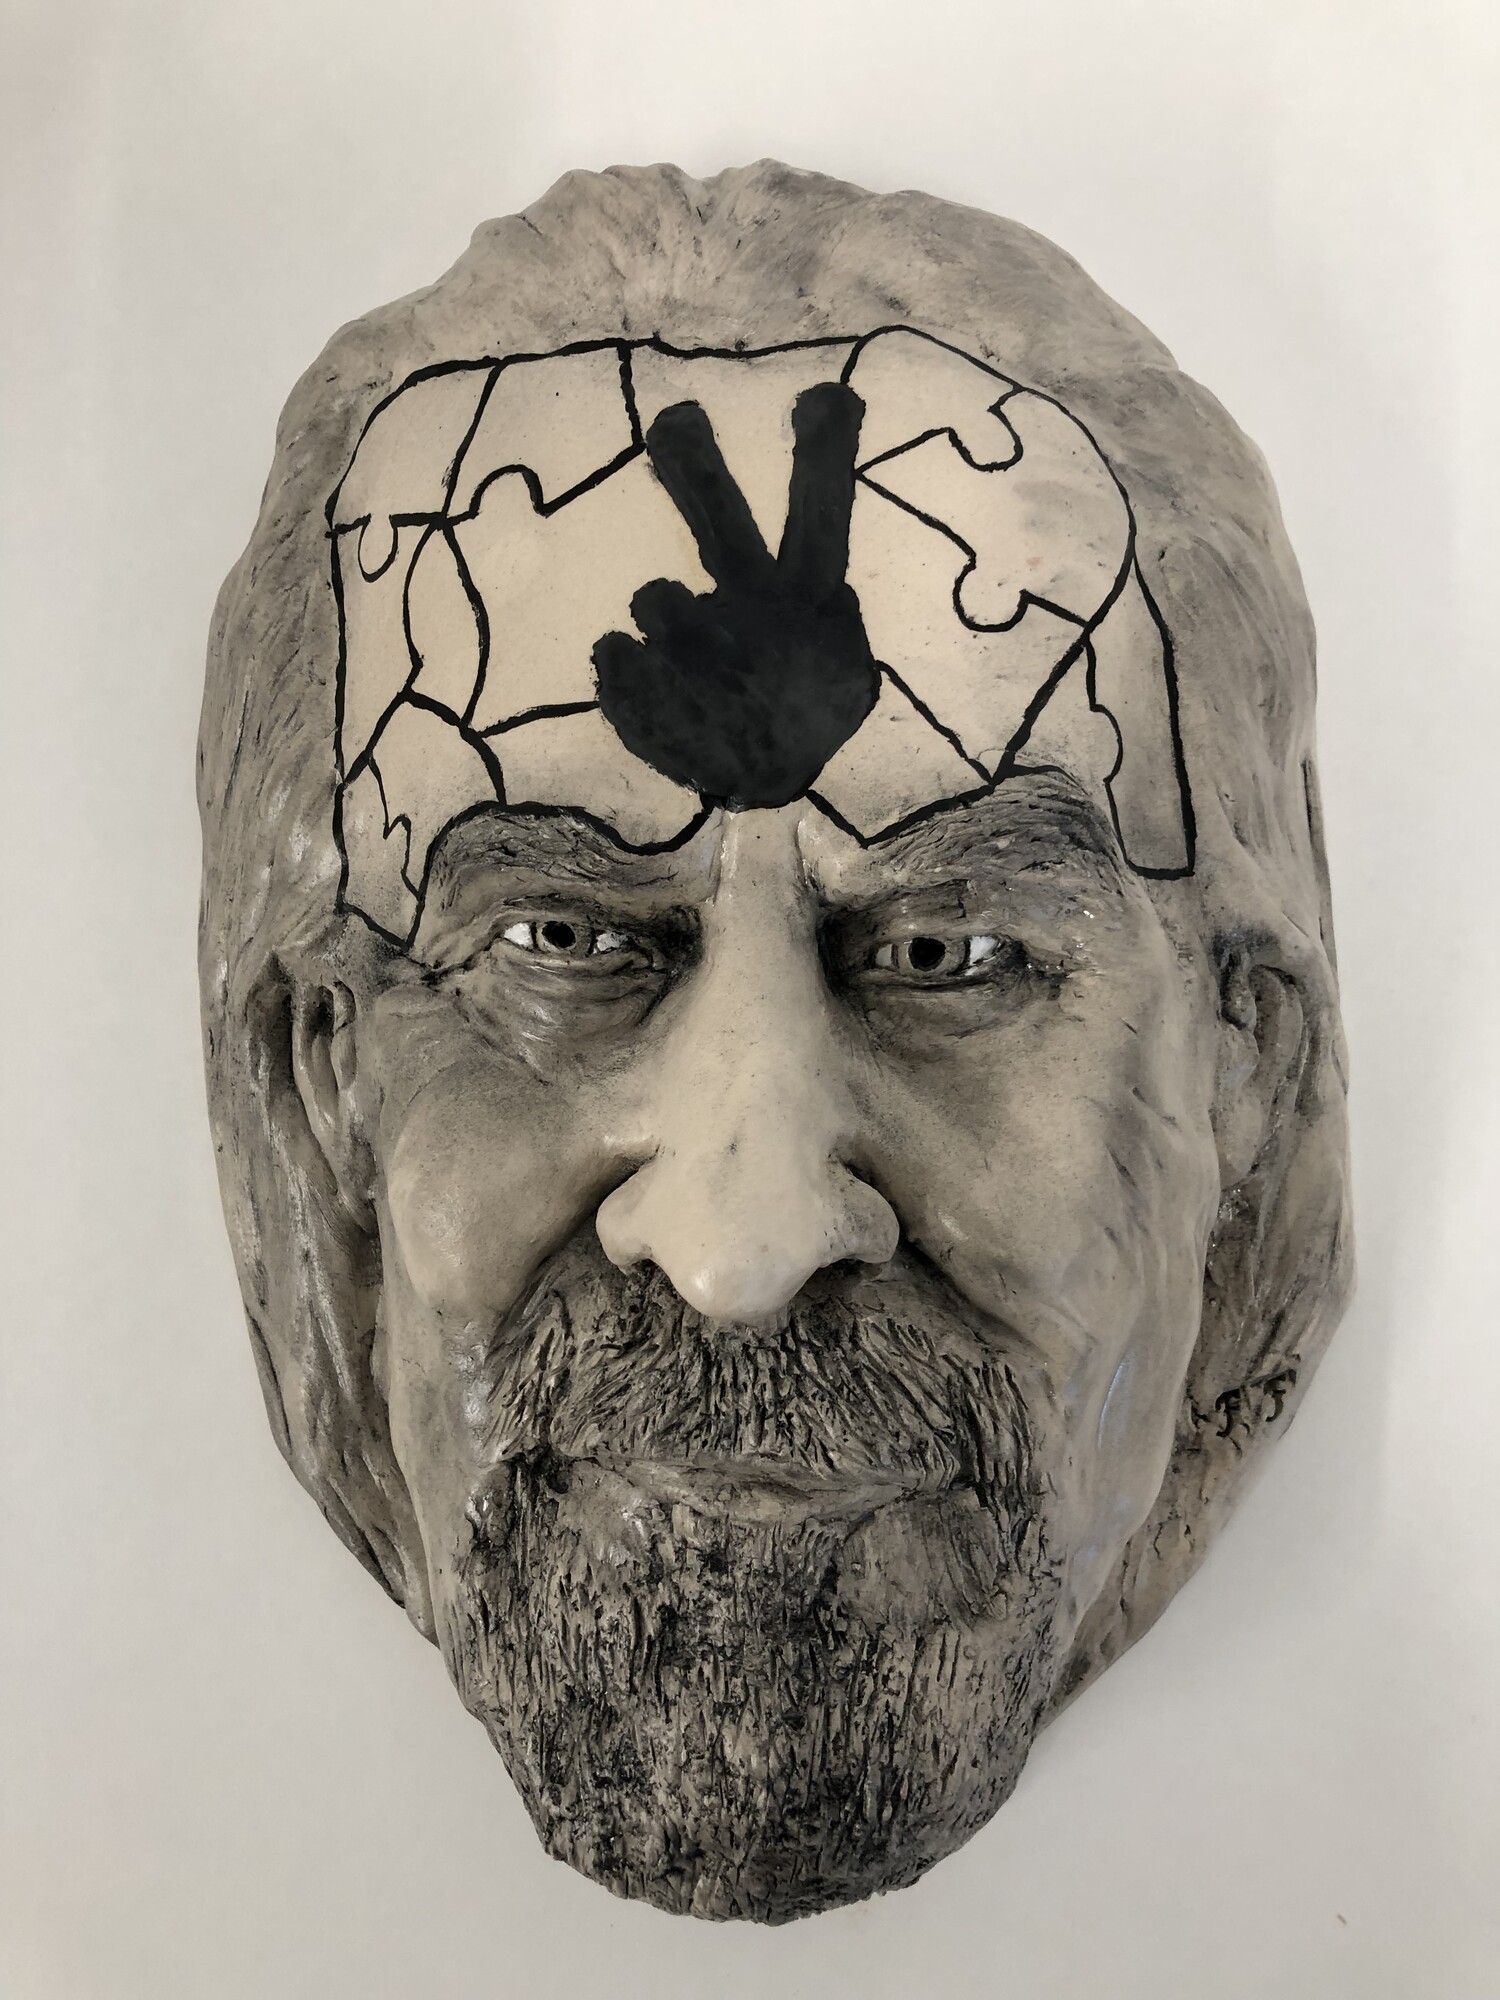 Peace Piece Dude
clay
8in. x 10in.

Fred Freeman

This is a hanging clay mask depicting kind of a hippie dude.